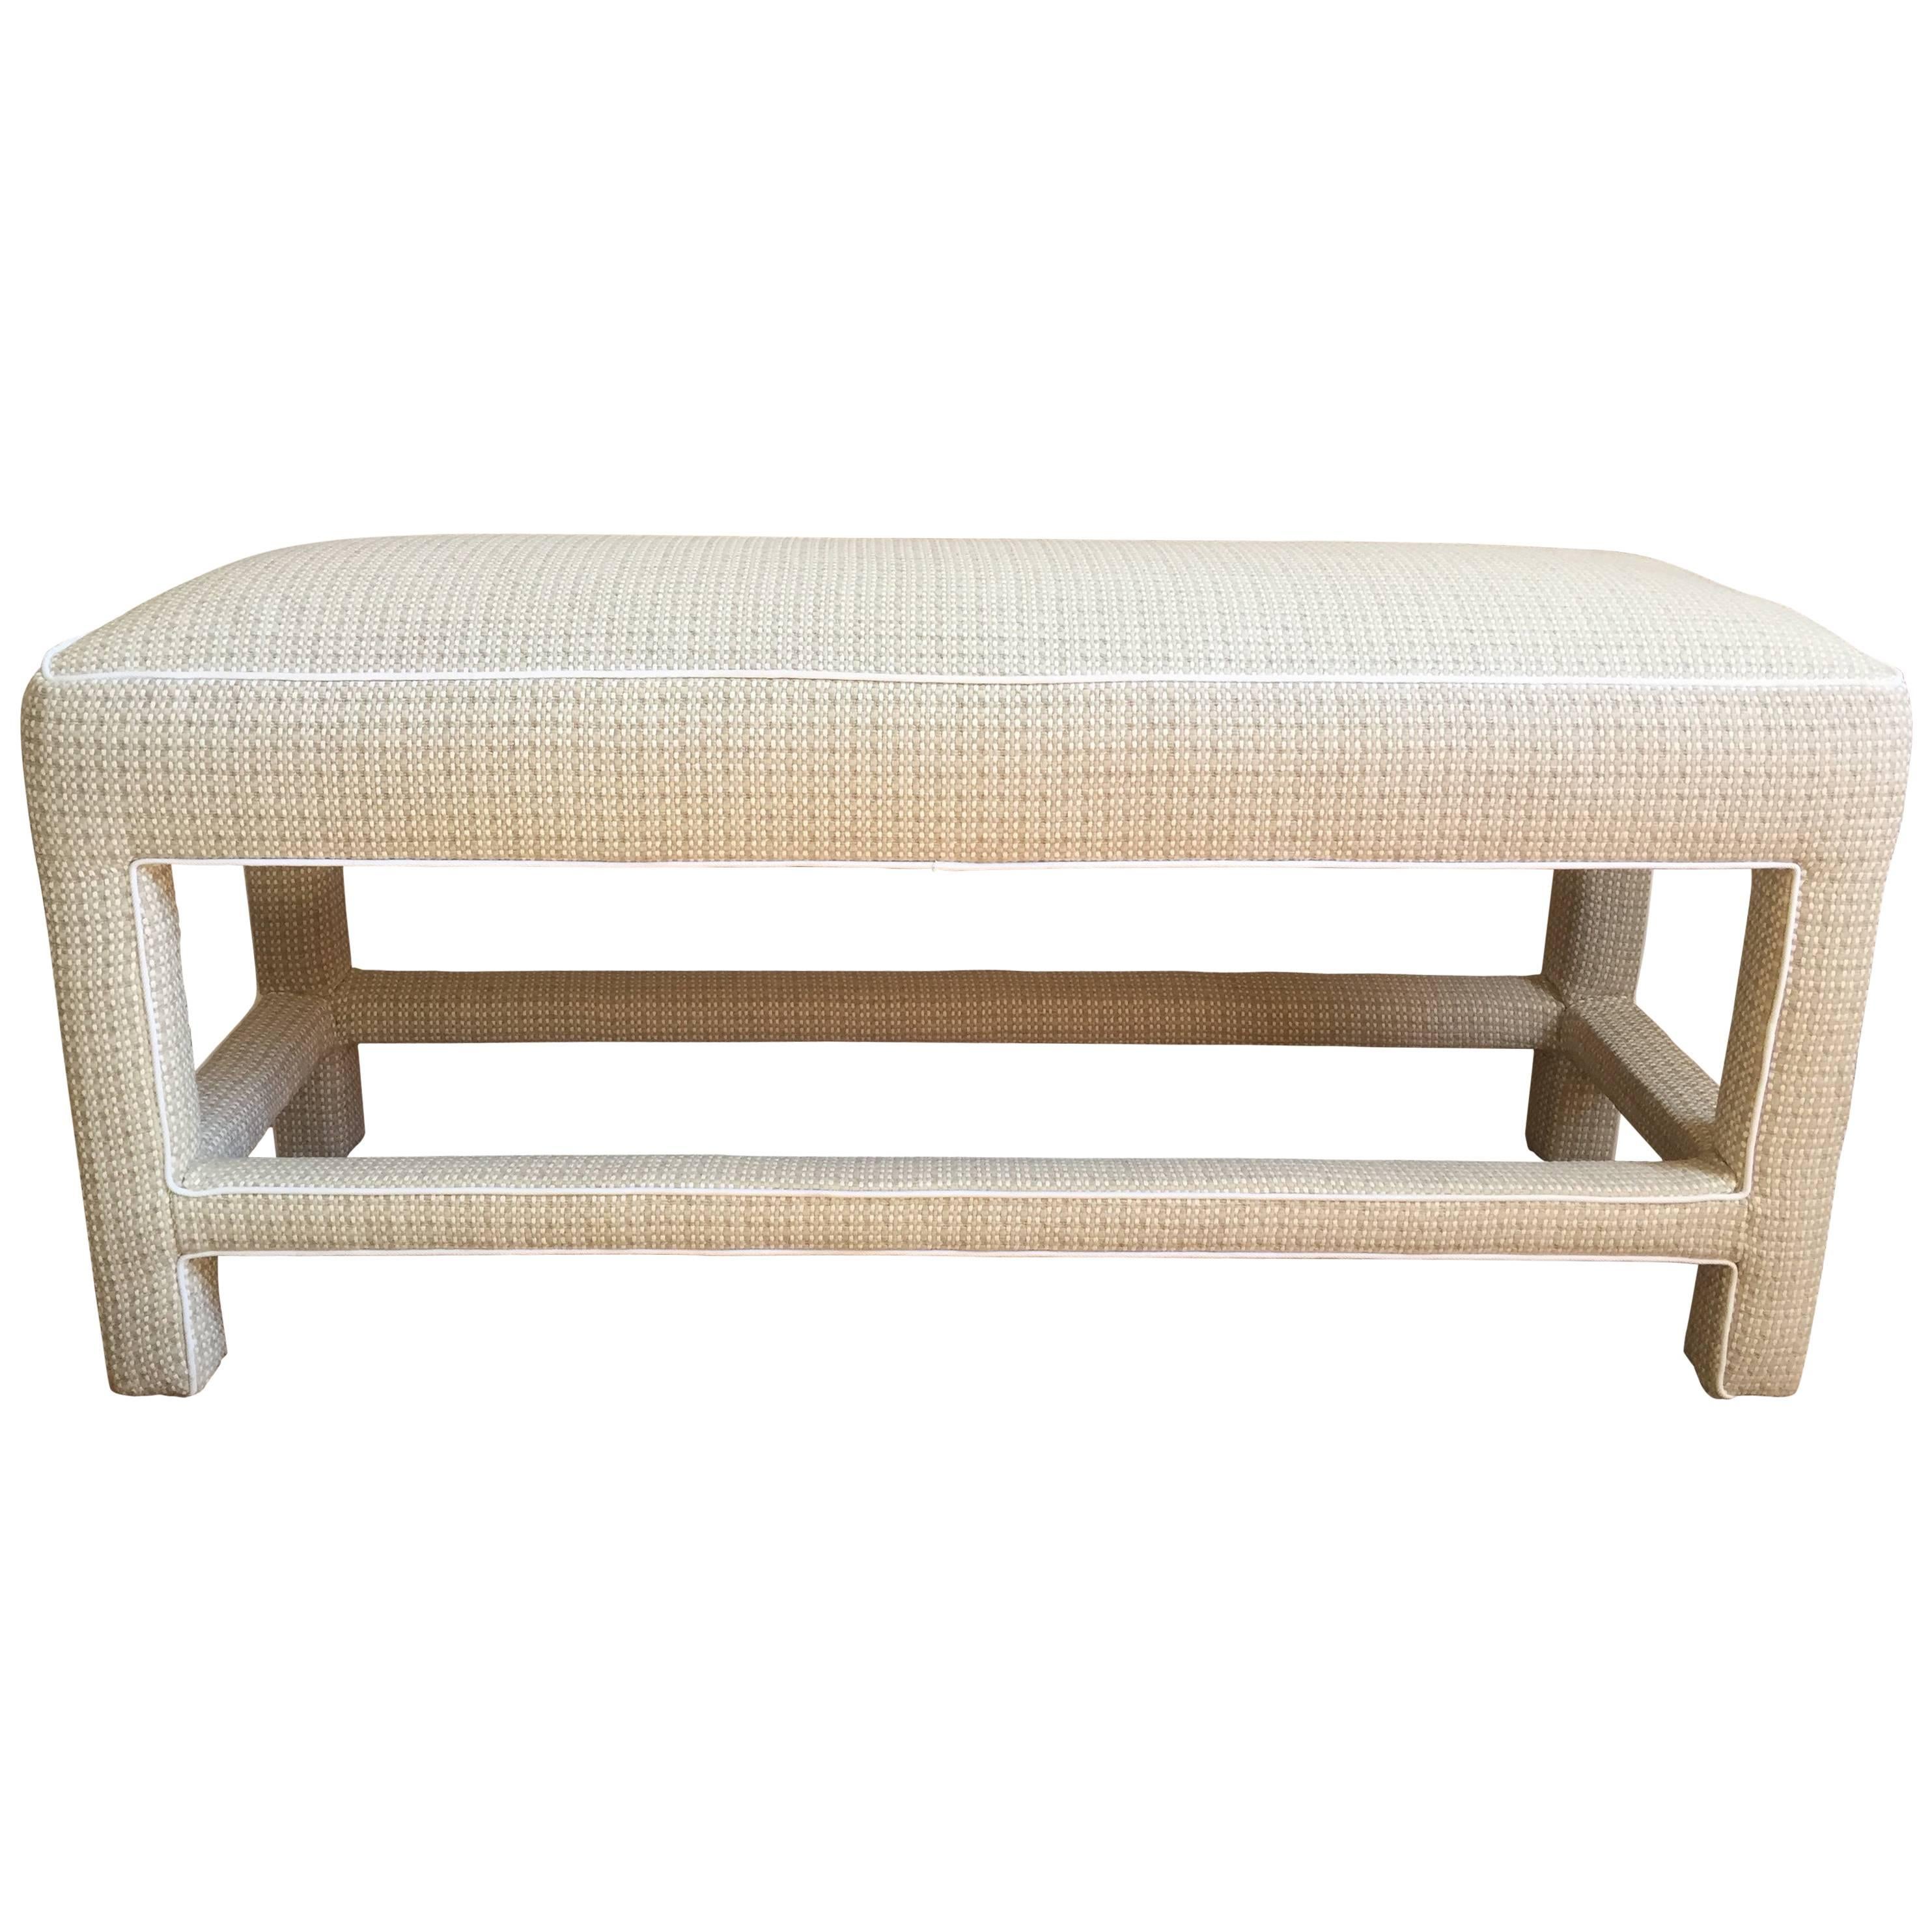 Classic Mid-Century Modern Upholstered Bench